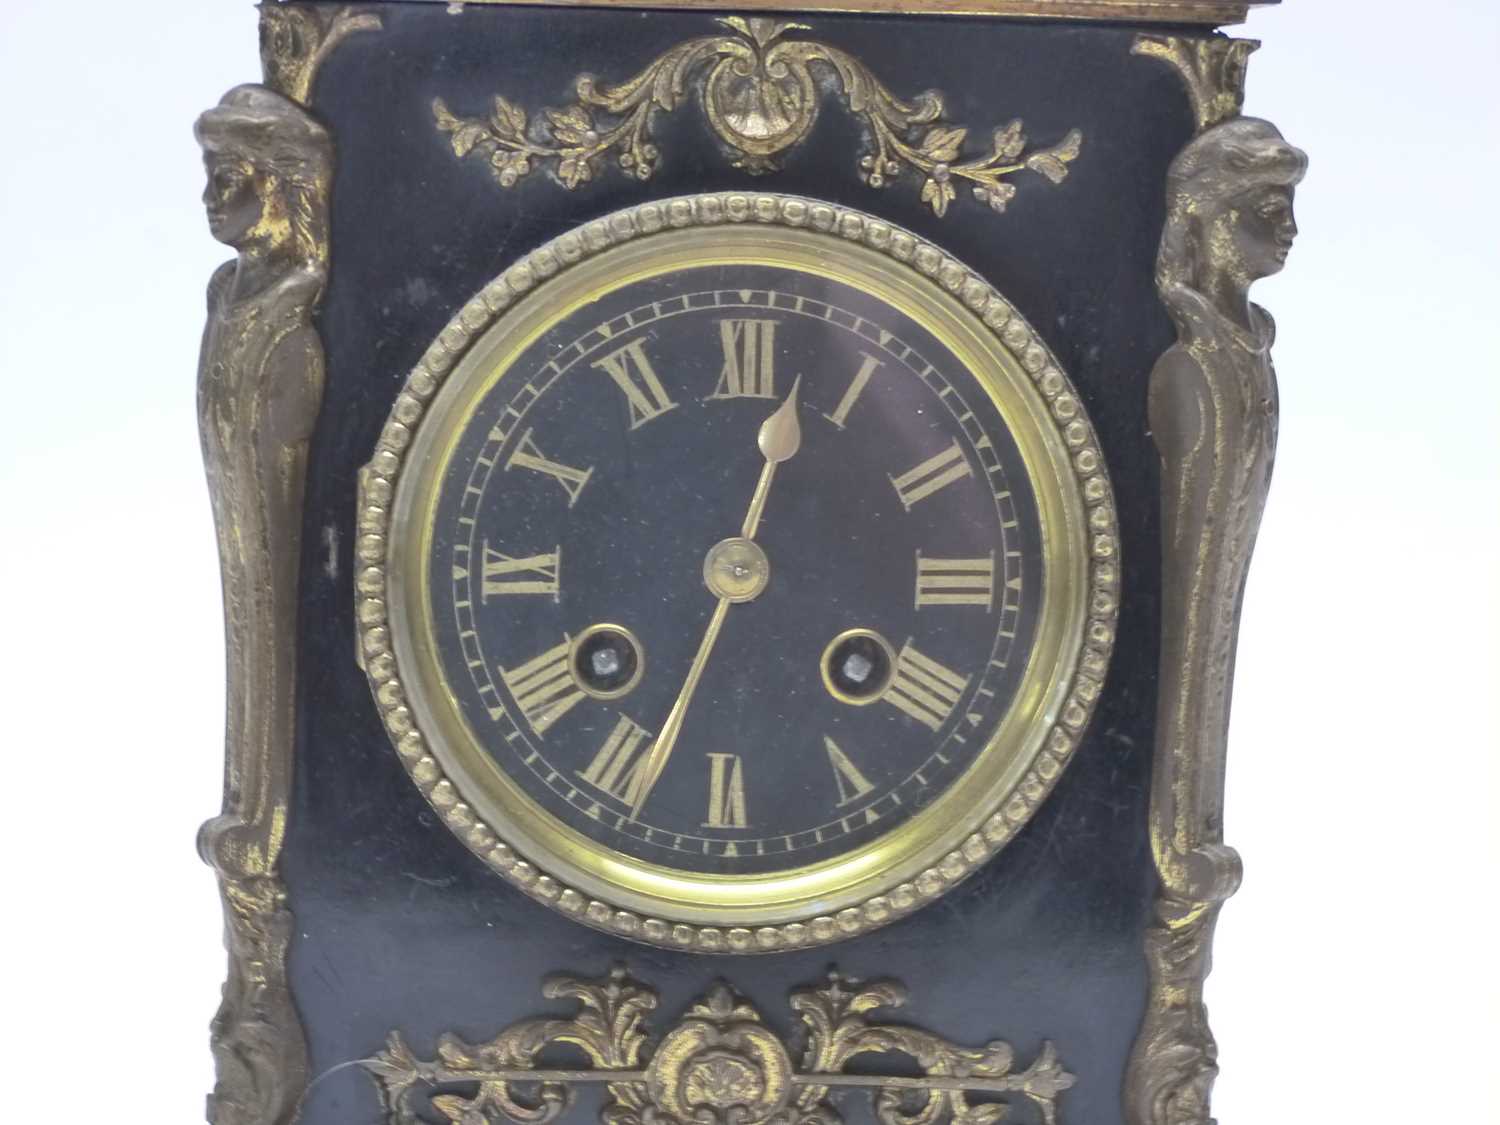 A 19th Century brass mantel clock, black ebonised wood with gilt brass decoration, 23cm high (with - Image 2 of 3